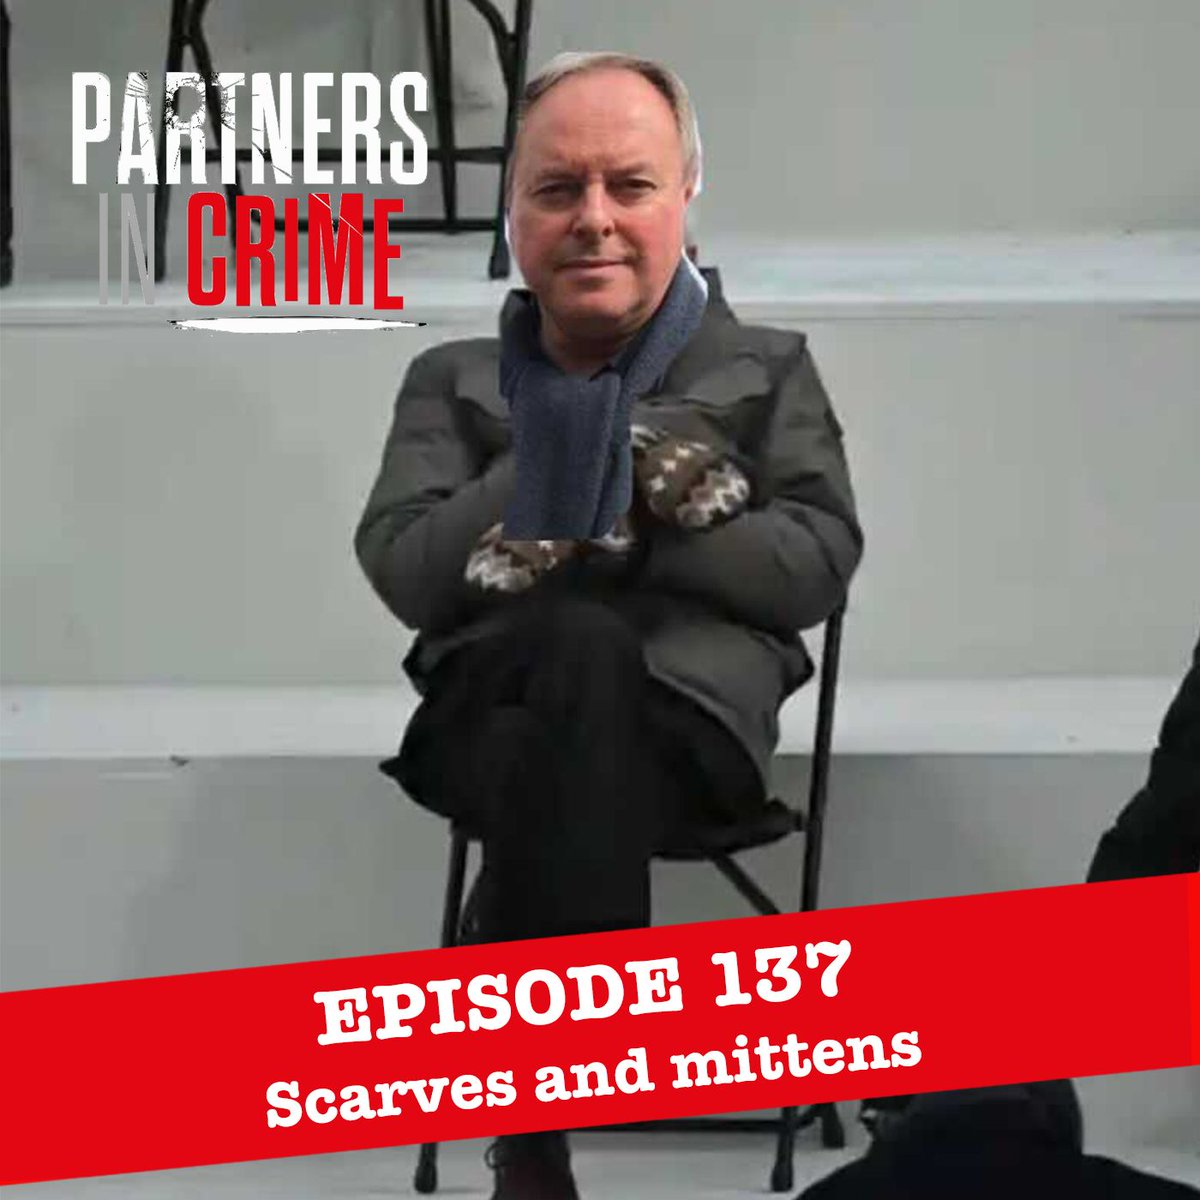 Why has Adam been in custody in Luton Police Station? Does Bob like Gordon Ramsay? And how is he coping with the return of winter? 
Listen to 'Scarves and mittens' with @robertdaws and @adamcroft at https://t.co/zNUPJ7fW2n or on your pod app of choice, and find out.
#amlistening https://t.co/7miwEY6ZJN